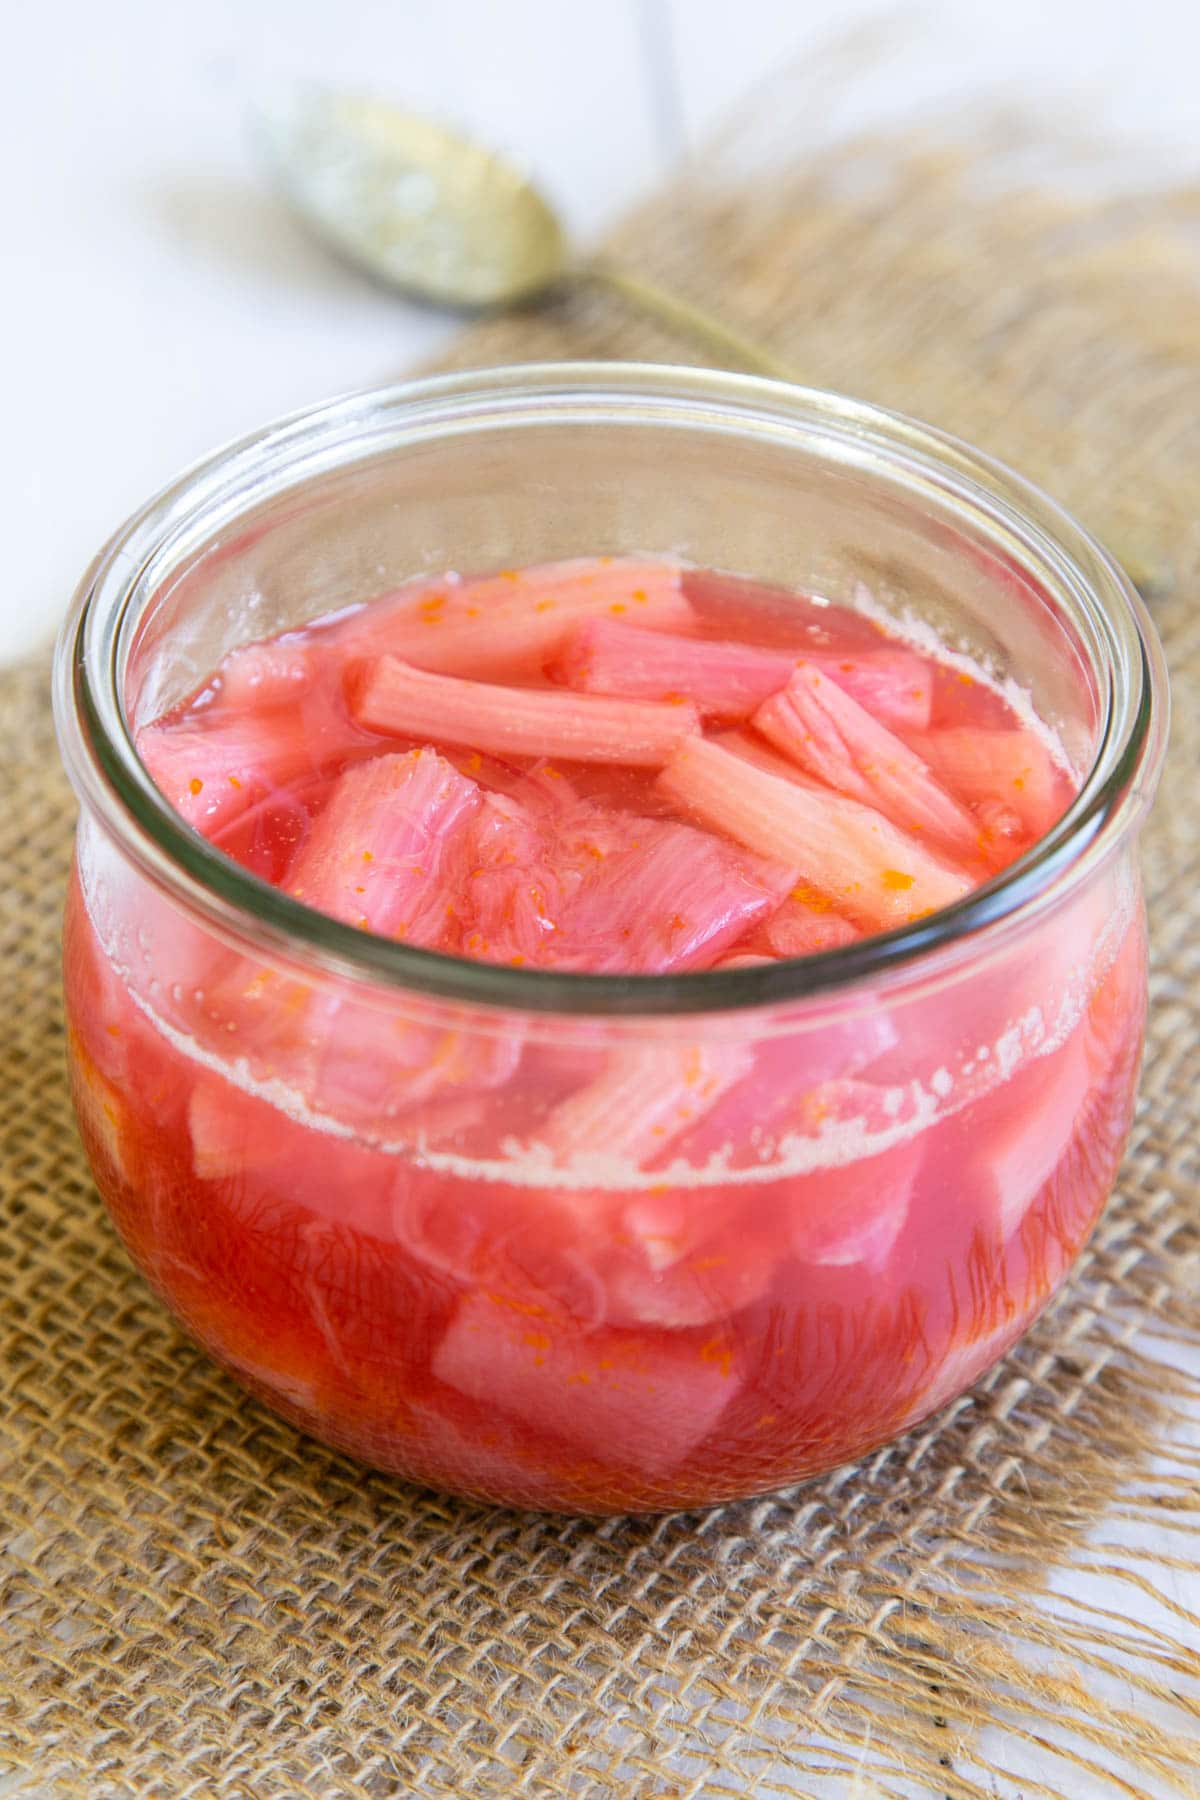 The pretty pink tones of stewed early rhubarb are shown off in all their glory in a glass serving dish.